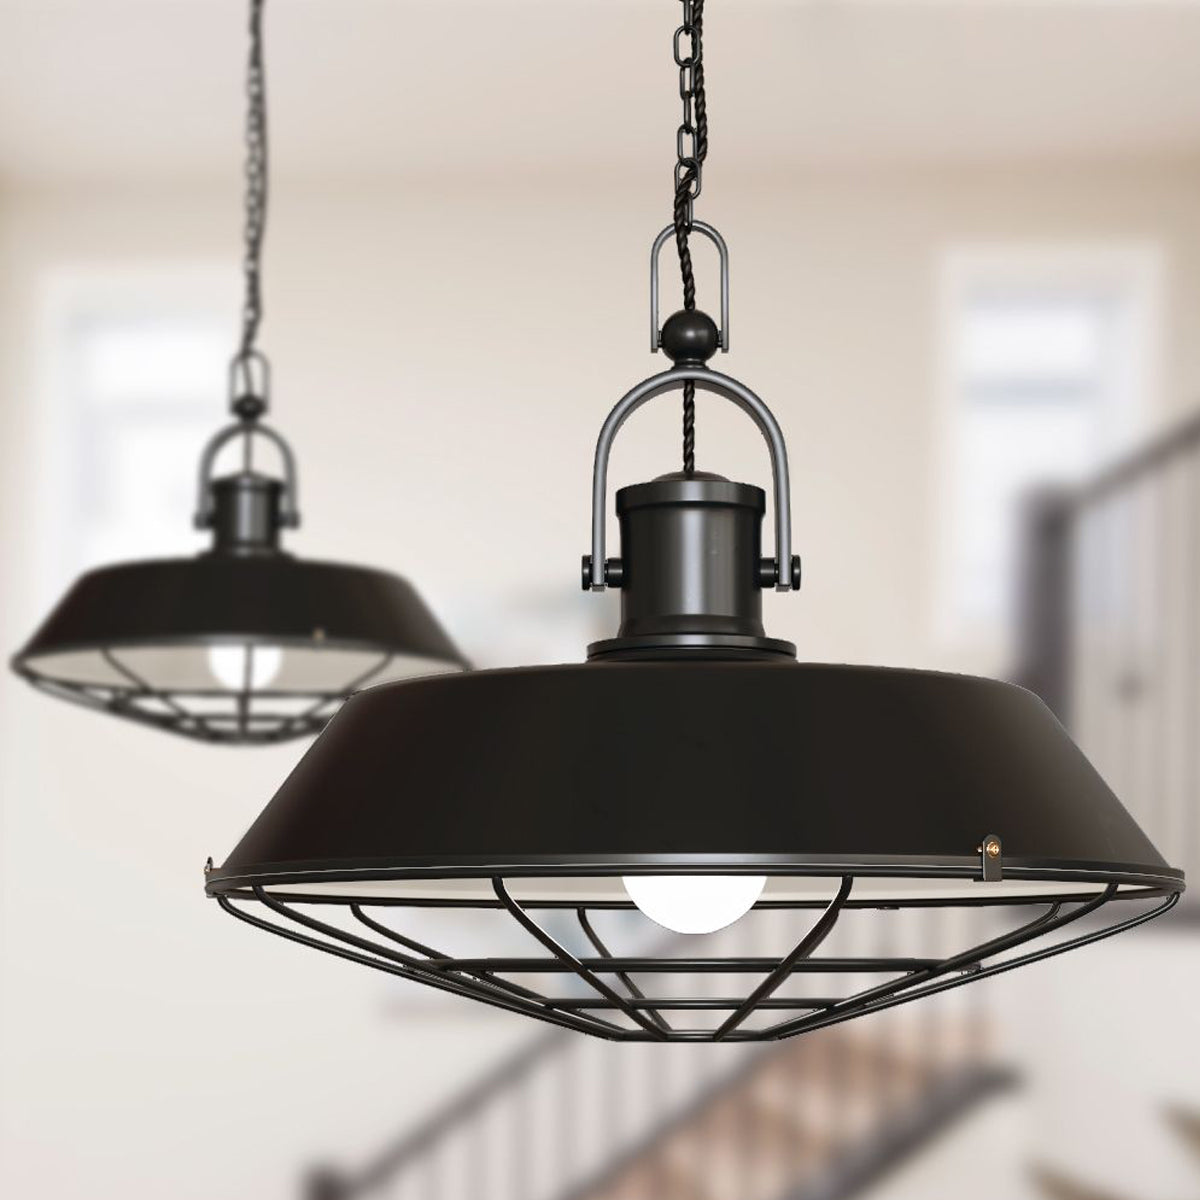 Our Margo pendant light is a stylish addition suitable for every room, its metal cage shape creates amazing shadow effects on the ceiling and walls. The lamp looks great with a filament light bulb, especially in industrial and eclectic interiors.